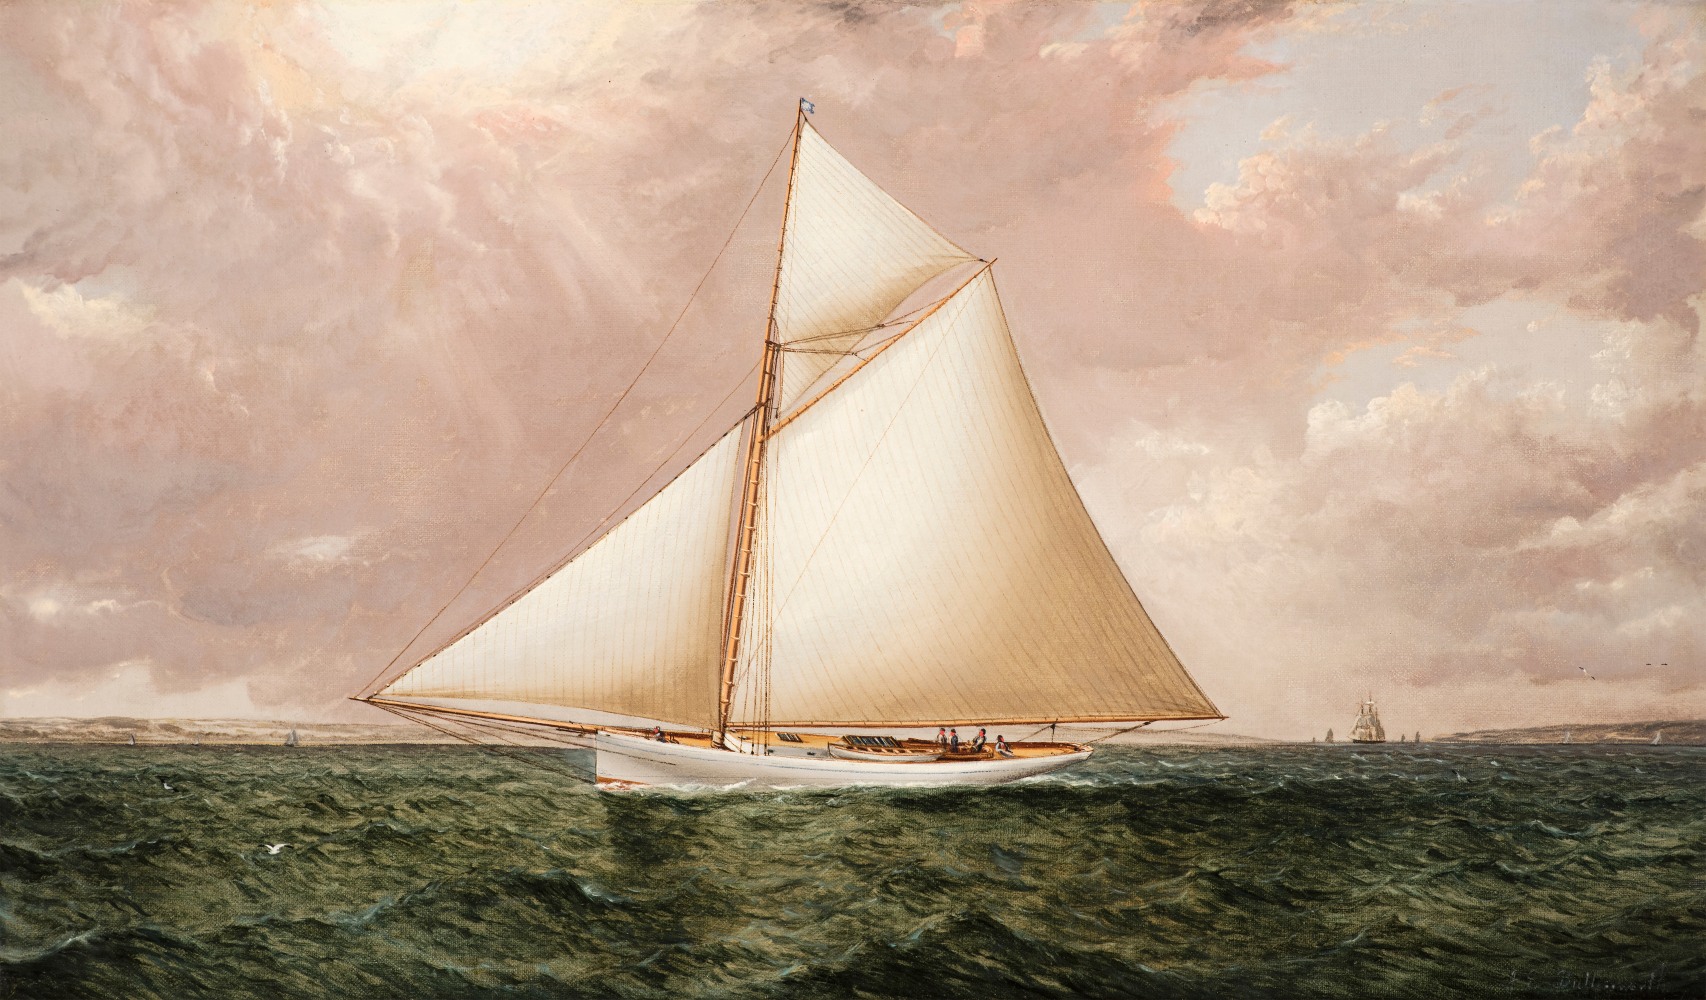 James E. Buttersworth (1817–1894), A Gaff Rigged Racing Cutter, c. 1893, oil on canvas, 12 x 20 in., signed lower right: Jas. Buttersworth